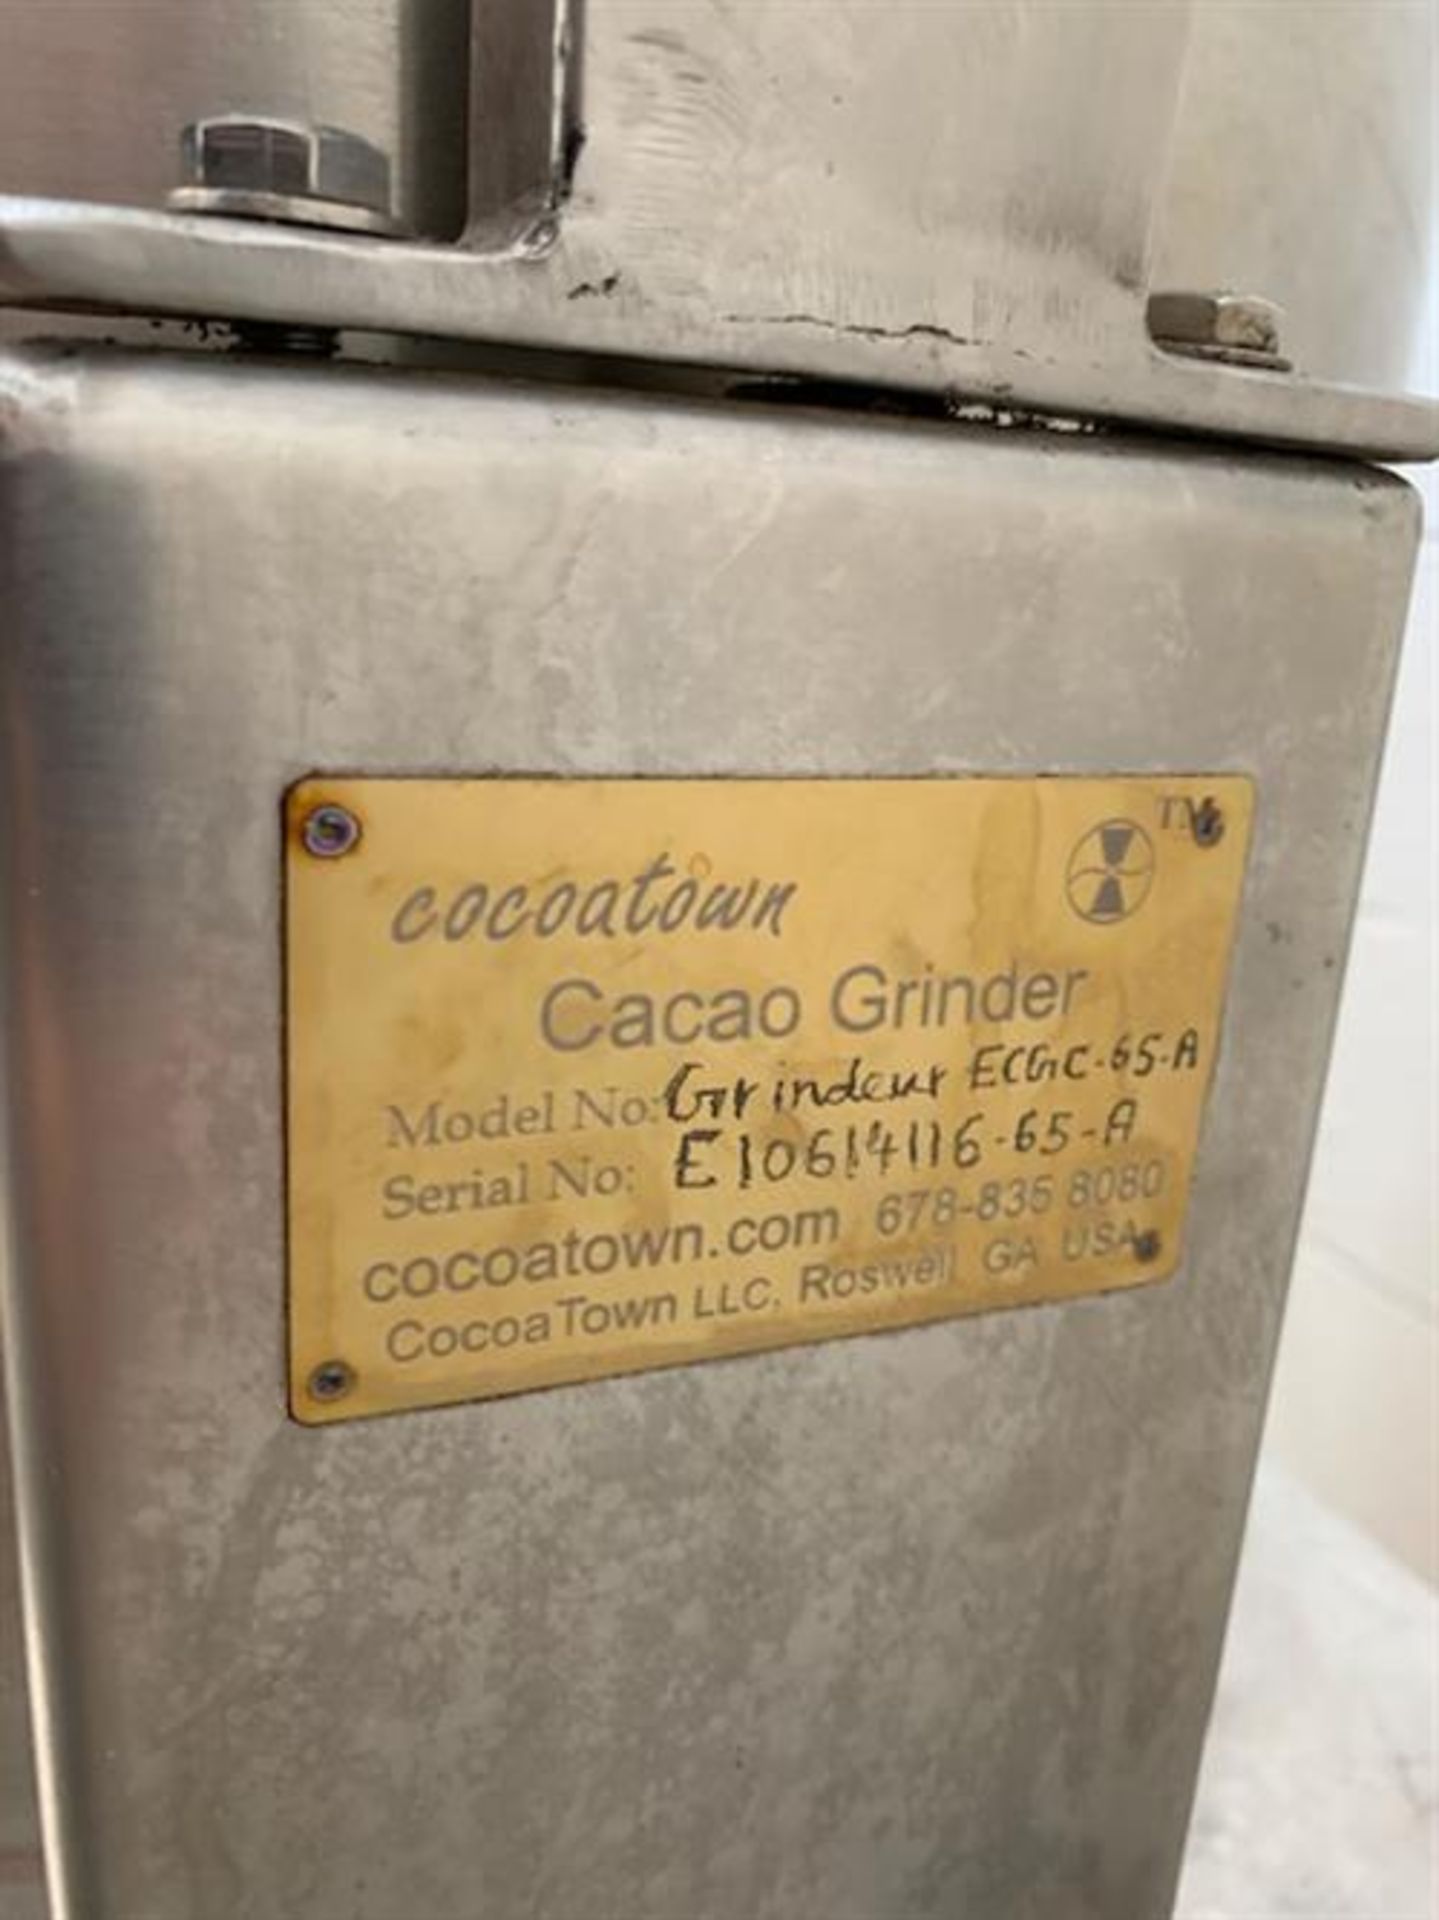 Cocoatown Model ECGC-65A Melangeur - Serial number E10614116-65A - 65lb batches - 3 phase 220v - Image 4 of 4